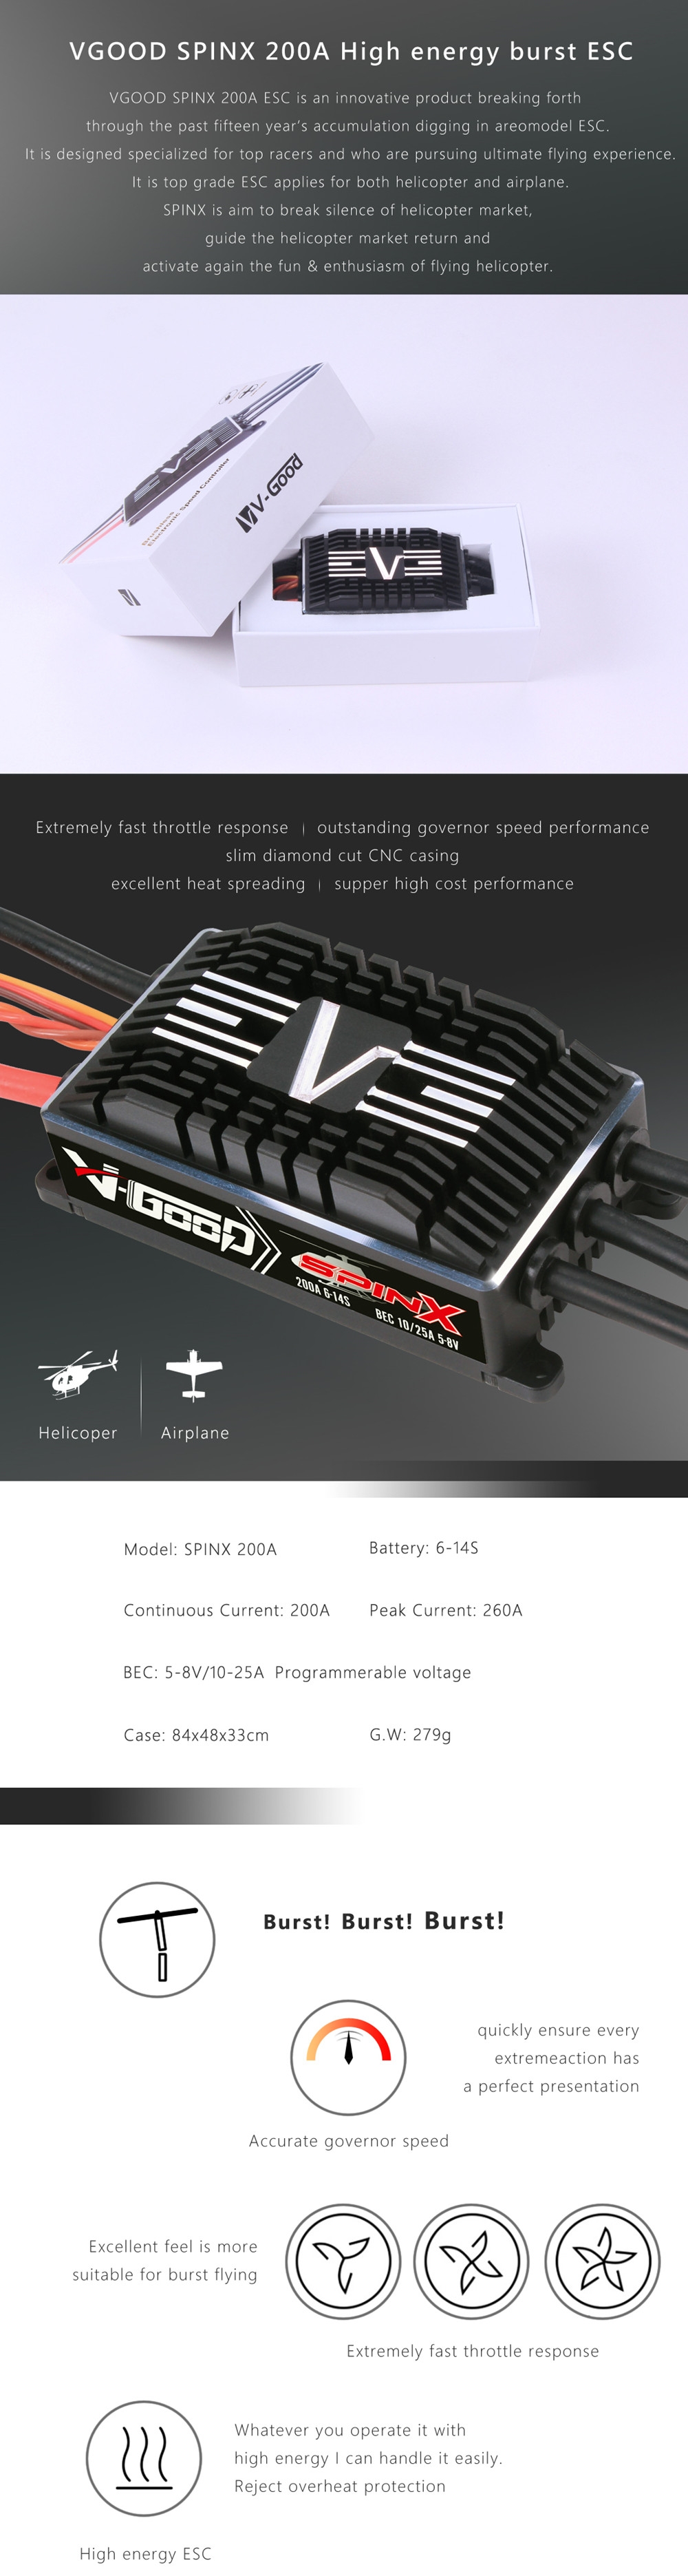 V-GOOD SPINX 200A 5-8V 25A Brushless ESC Support HV 6-14S Lipo Battery For 700 Class RC Helicopter RC Airplane